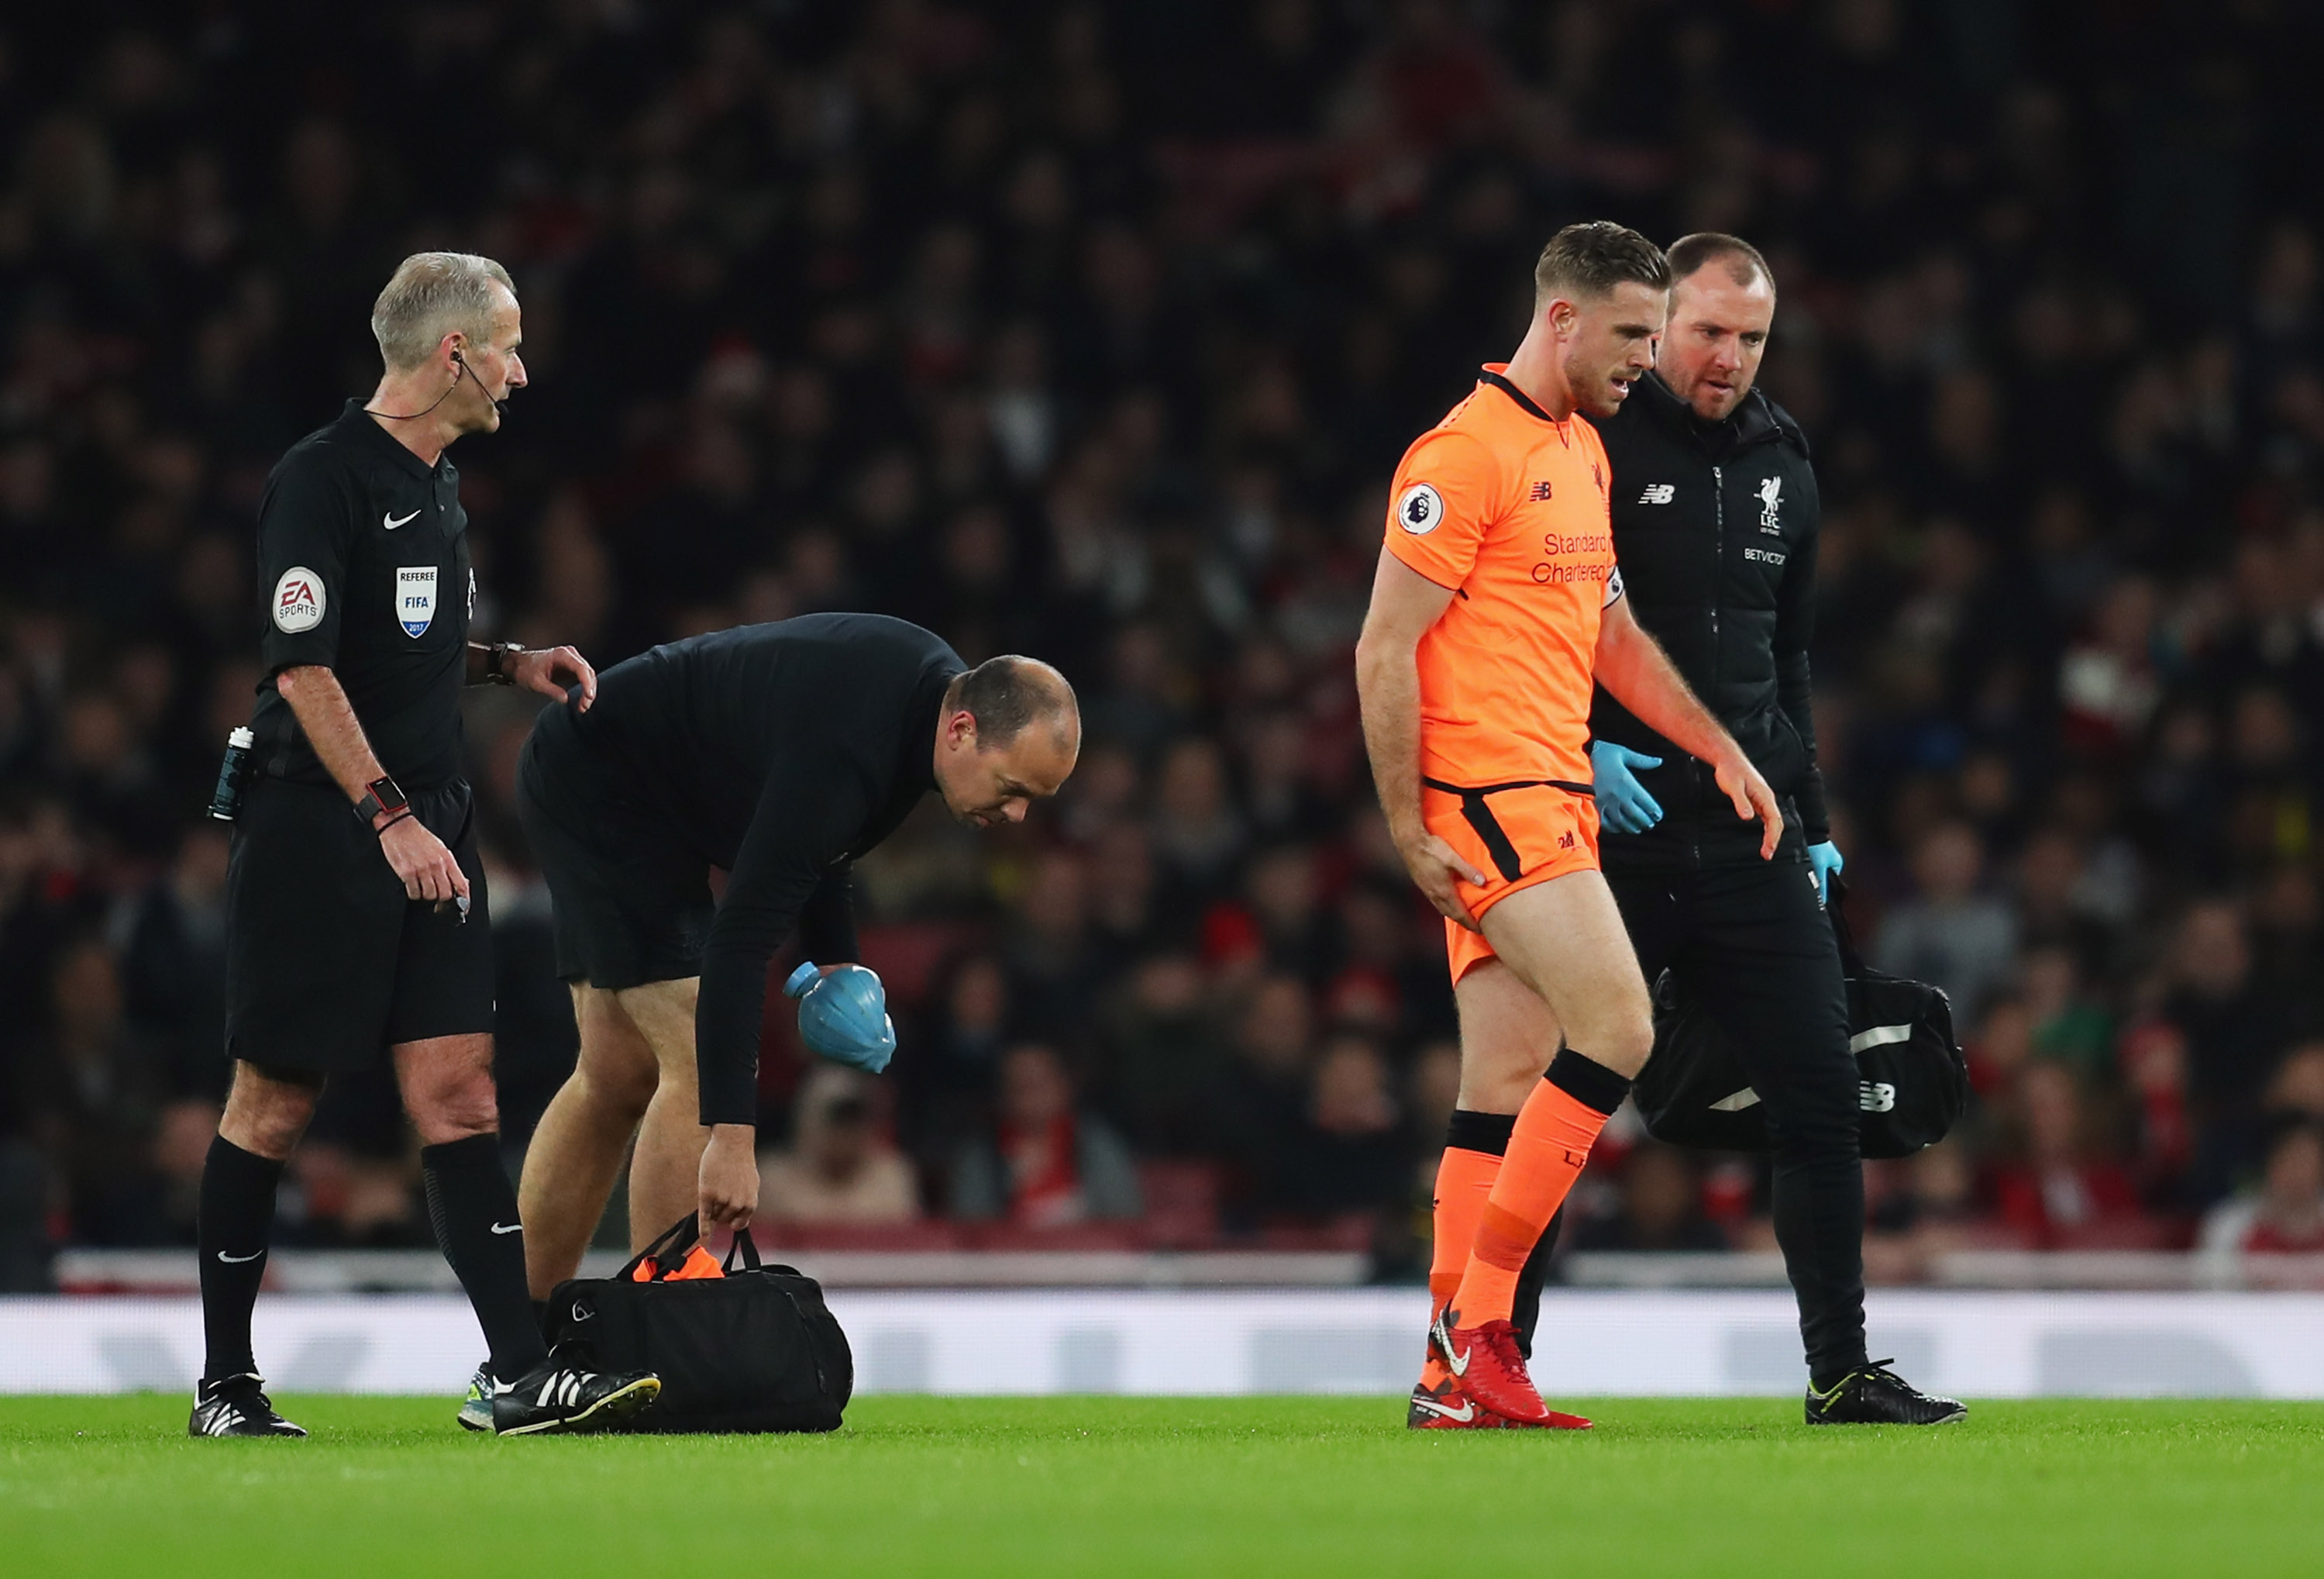 LONDON, ENGLAND - DECEMBER 22:  An injured Jordan Henderson of Liverpool (14) is given assistance during the Premier League match between Arsenal and Liverpool at Emirates Stadium on December 22, 2017 in London, England.  (Photo by Catherine Ivill/Getty Images)